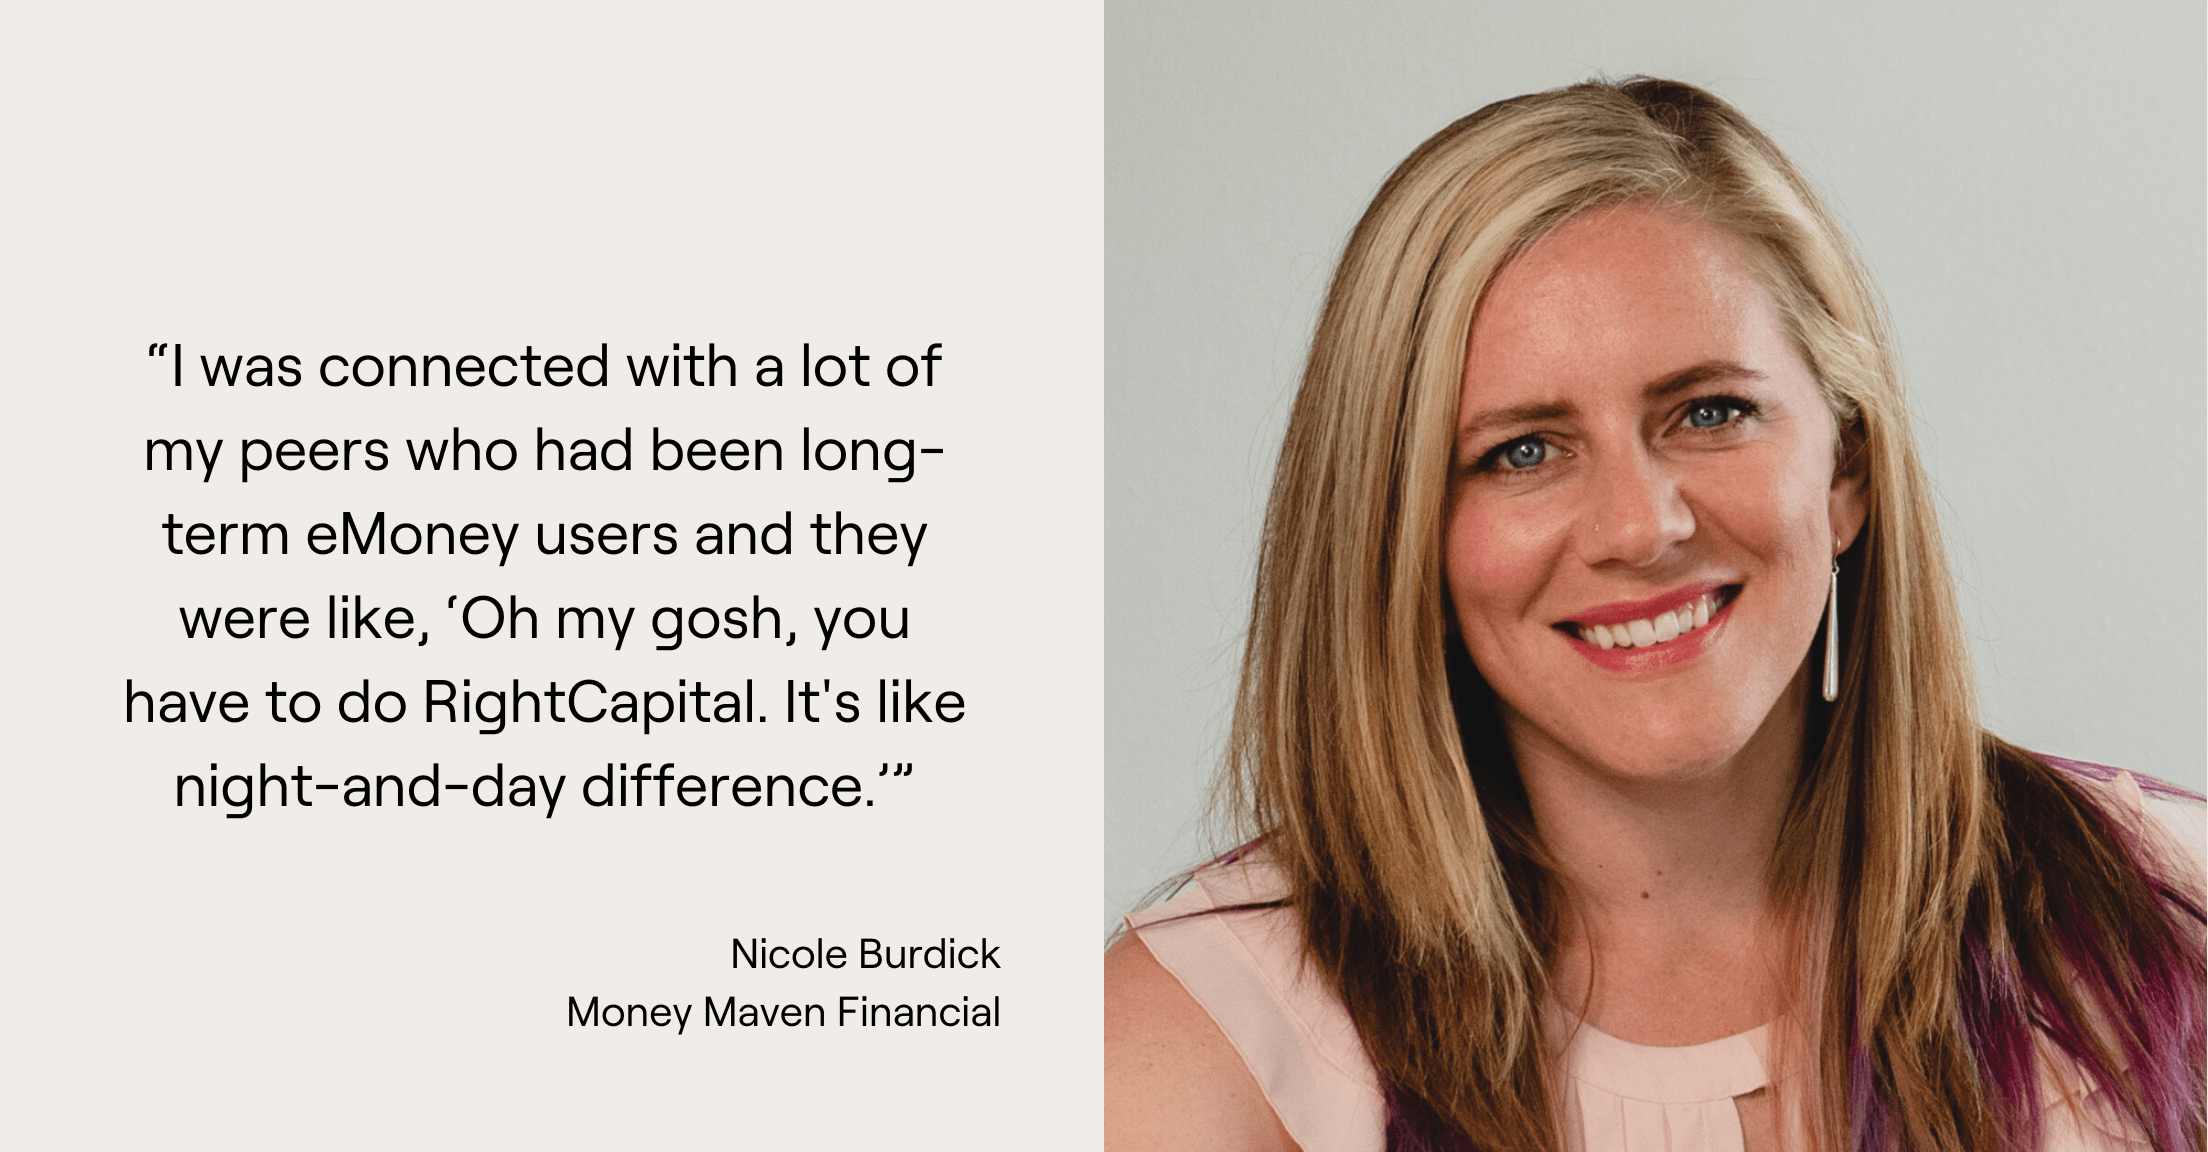 Nicole Burdick headshot and quote, “I was connected with a lot of my peers who had been long-term eMoney users and they were like, ‘Oh my gosh, you have to do RightCapital. It's like night-and-day difference.’”